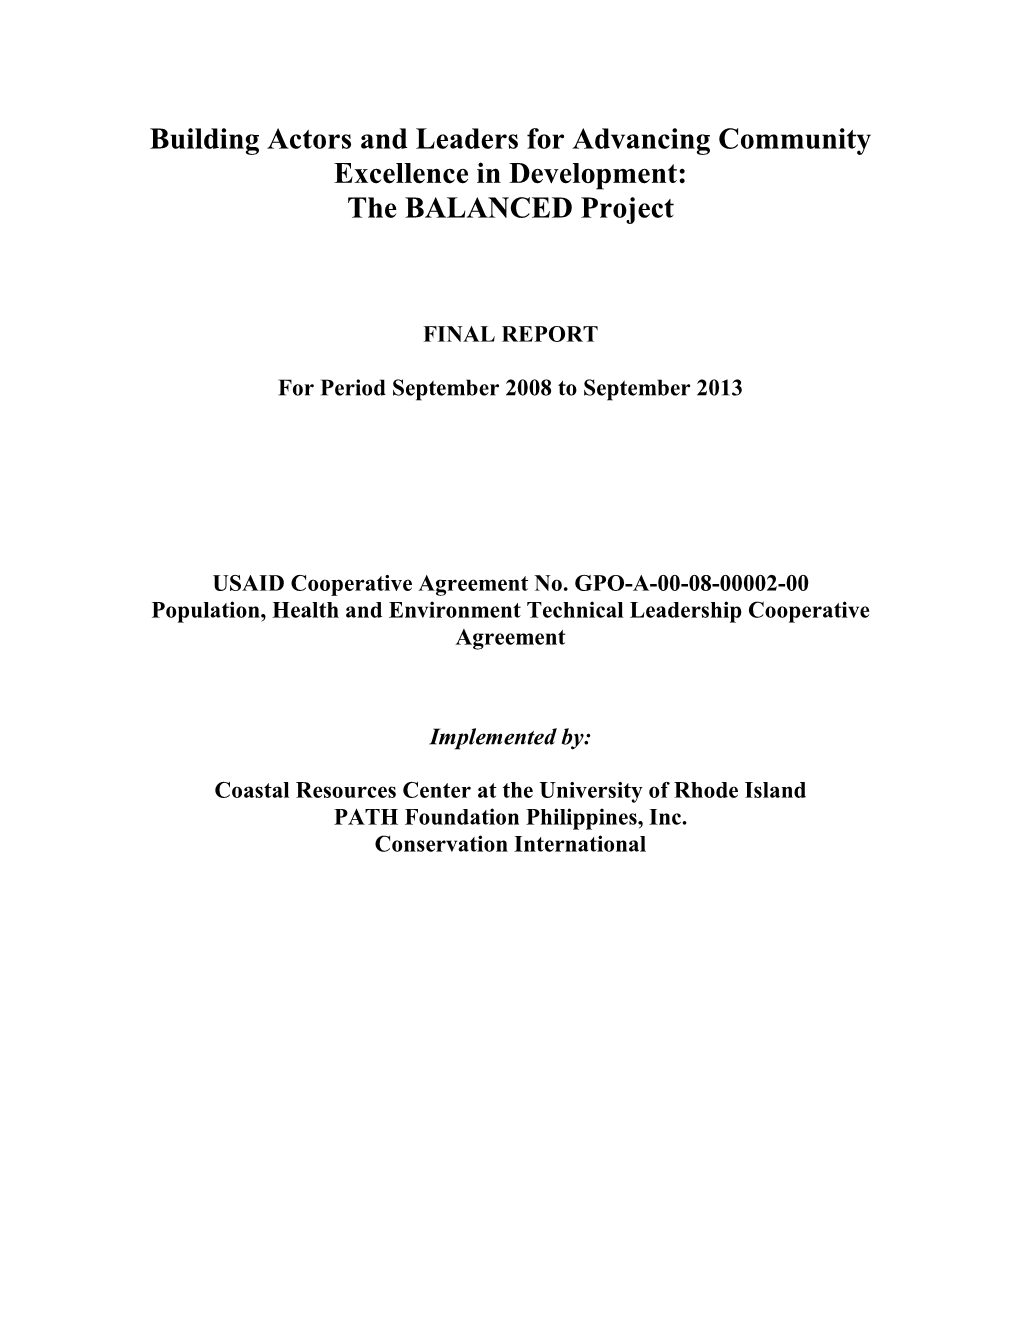 The BALANCED Project Final Report, September 2008